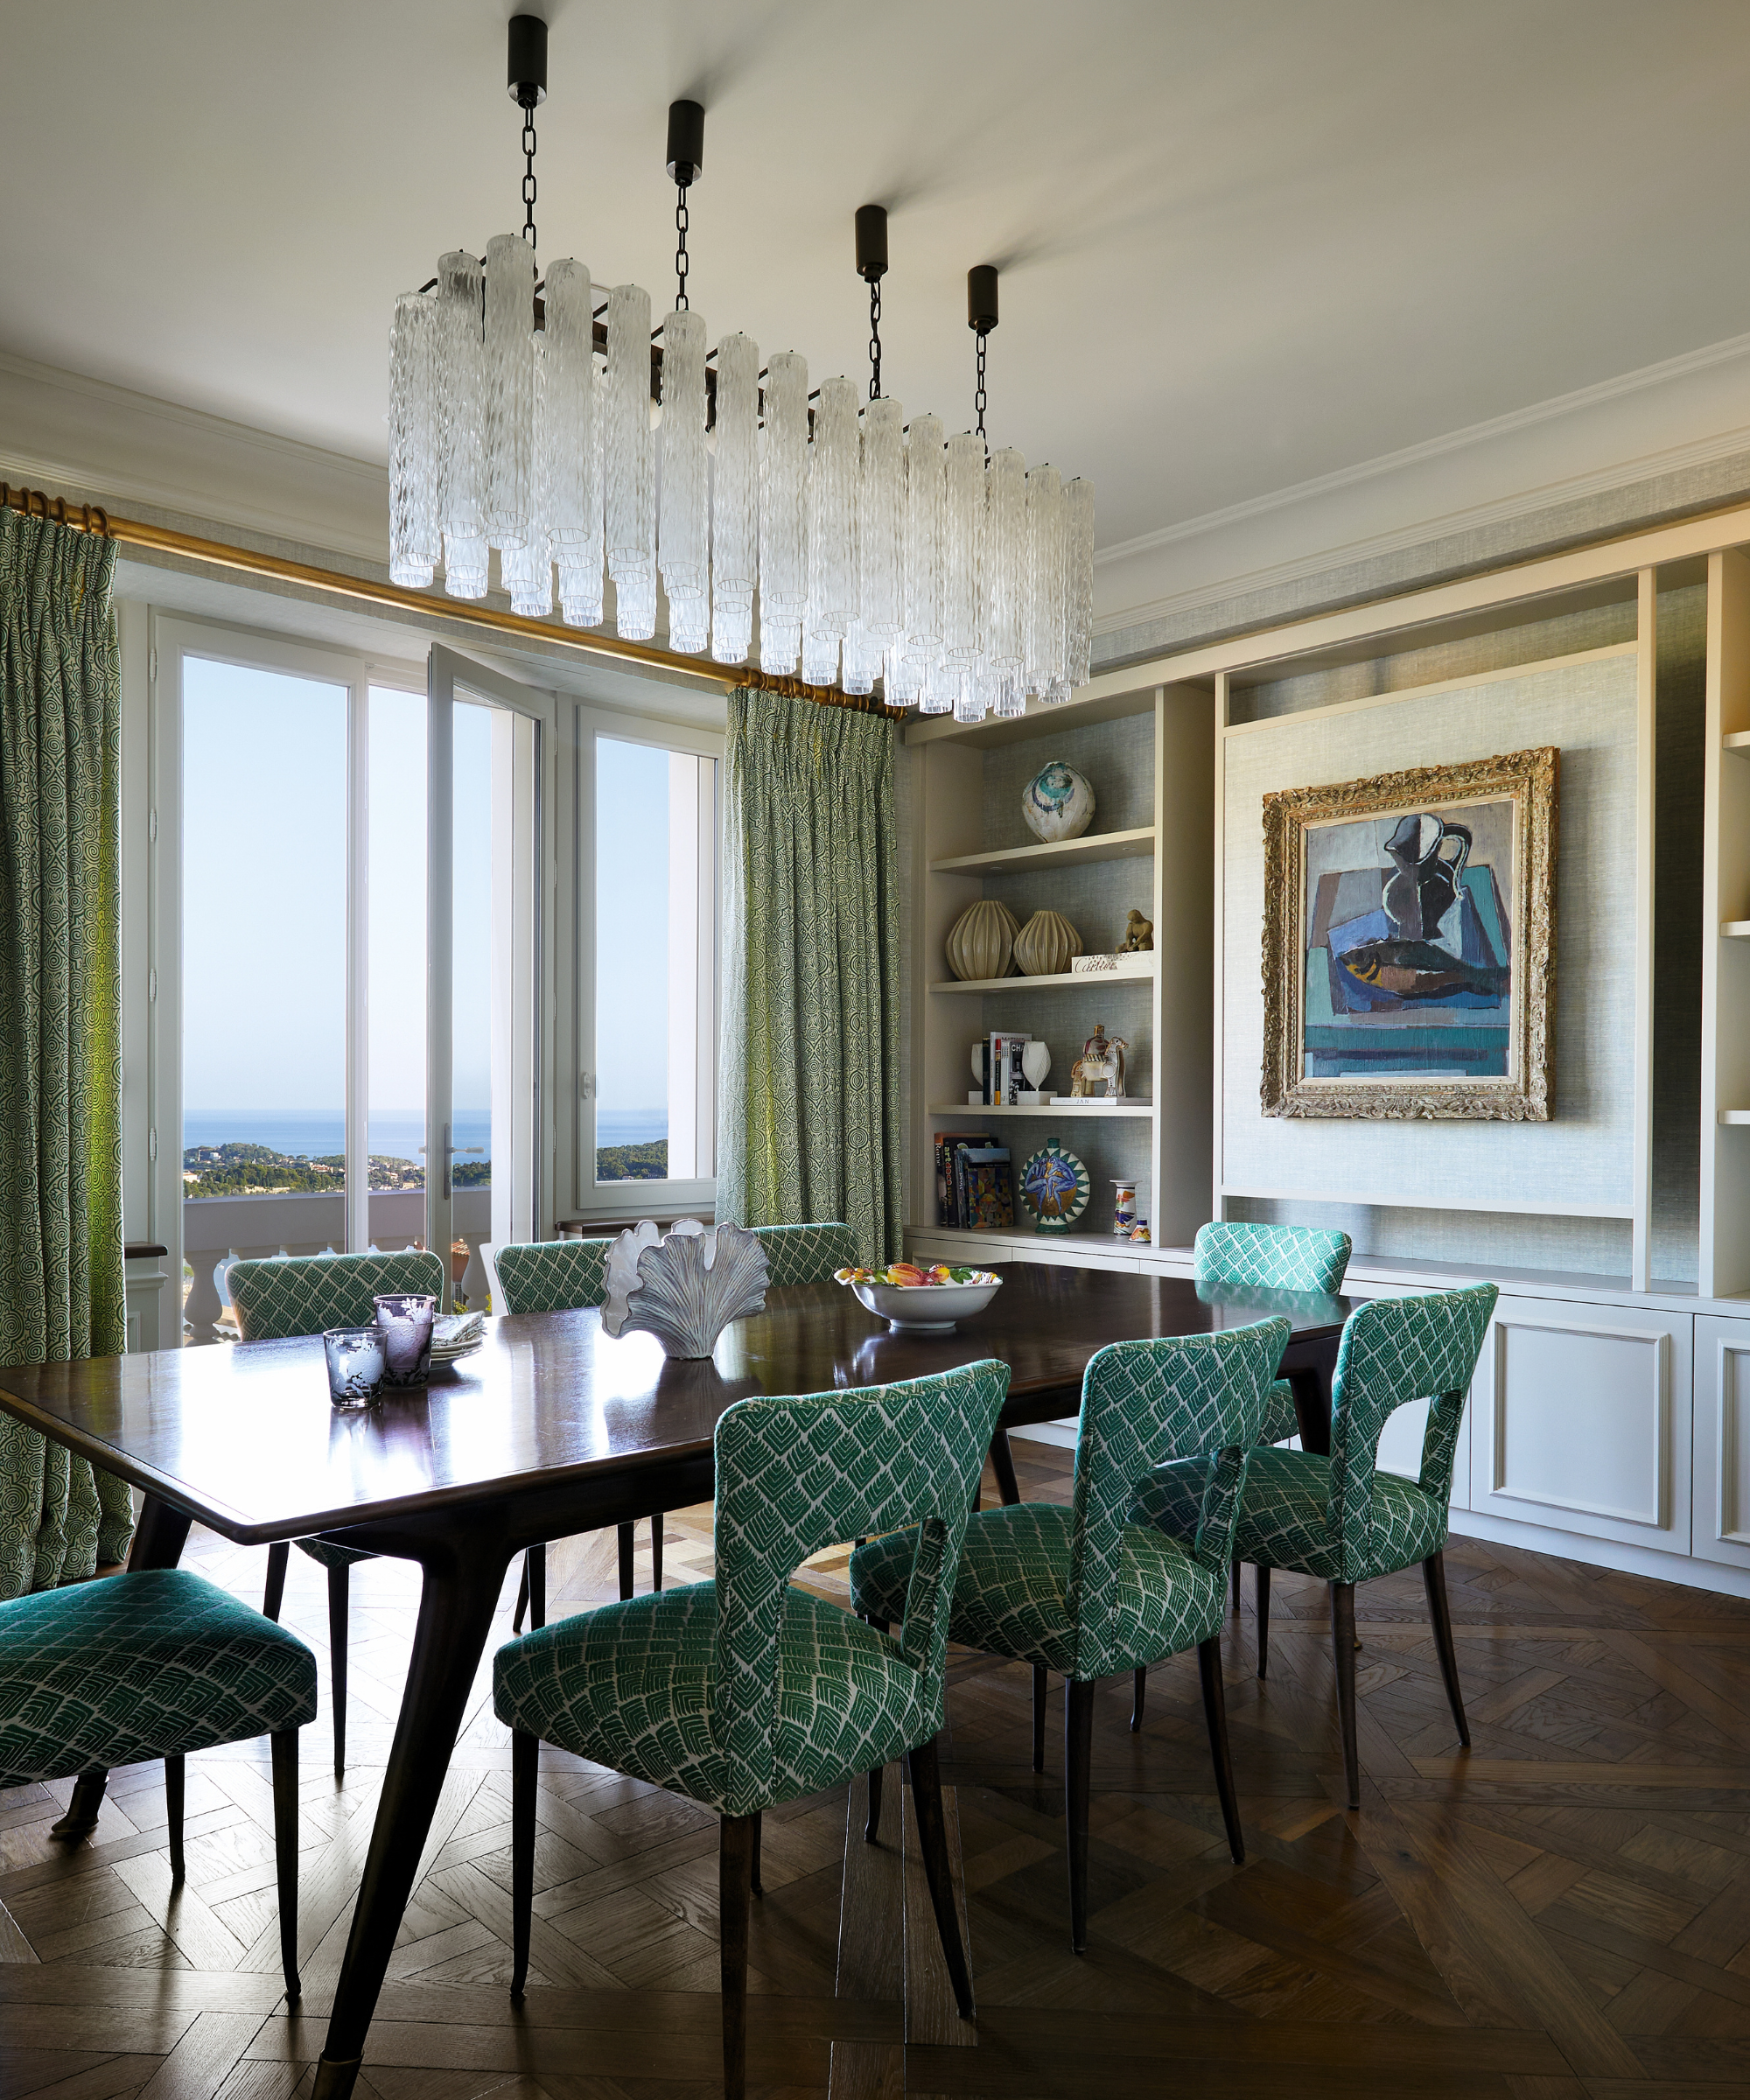 dining area with green chairs and chandelier